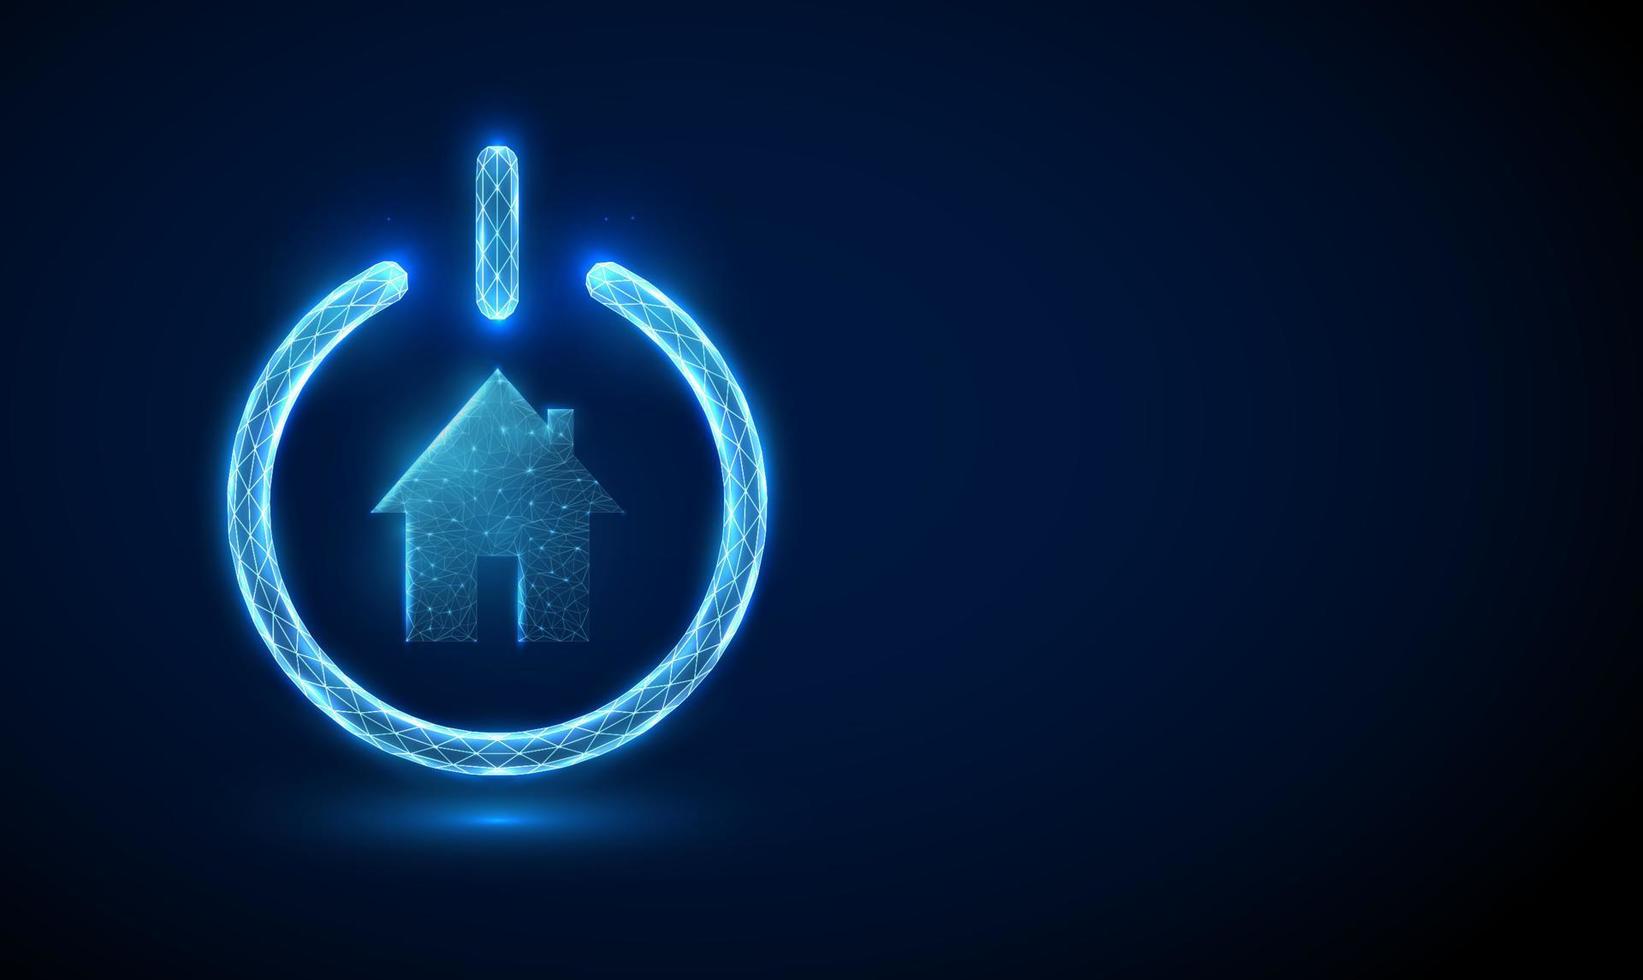 Abstract blue glowing house icon in power button vector